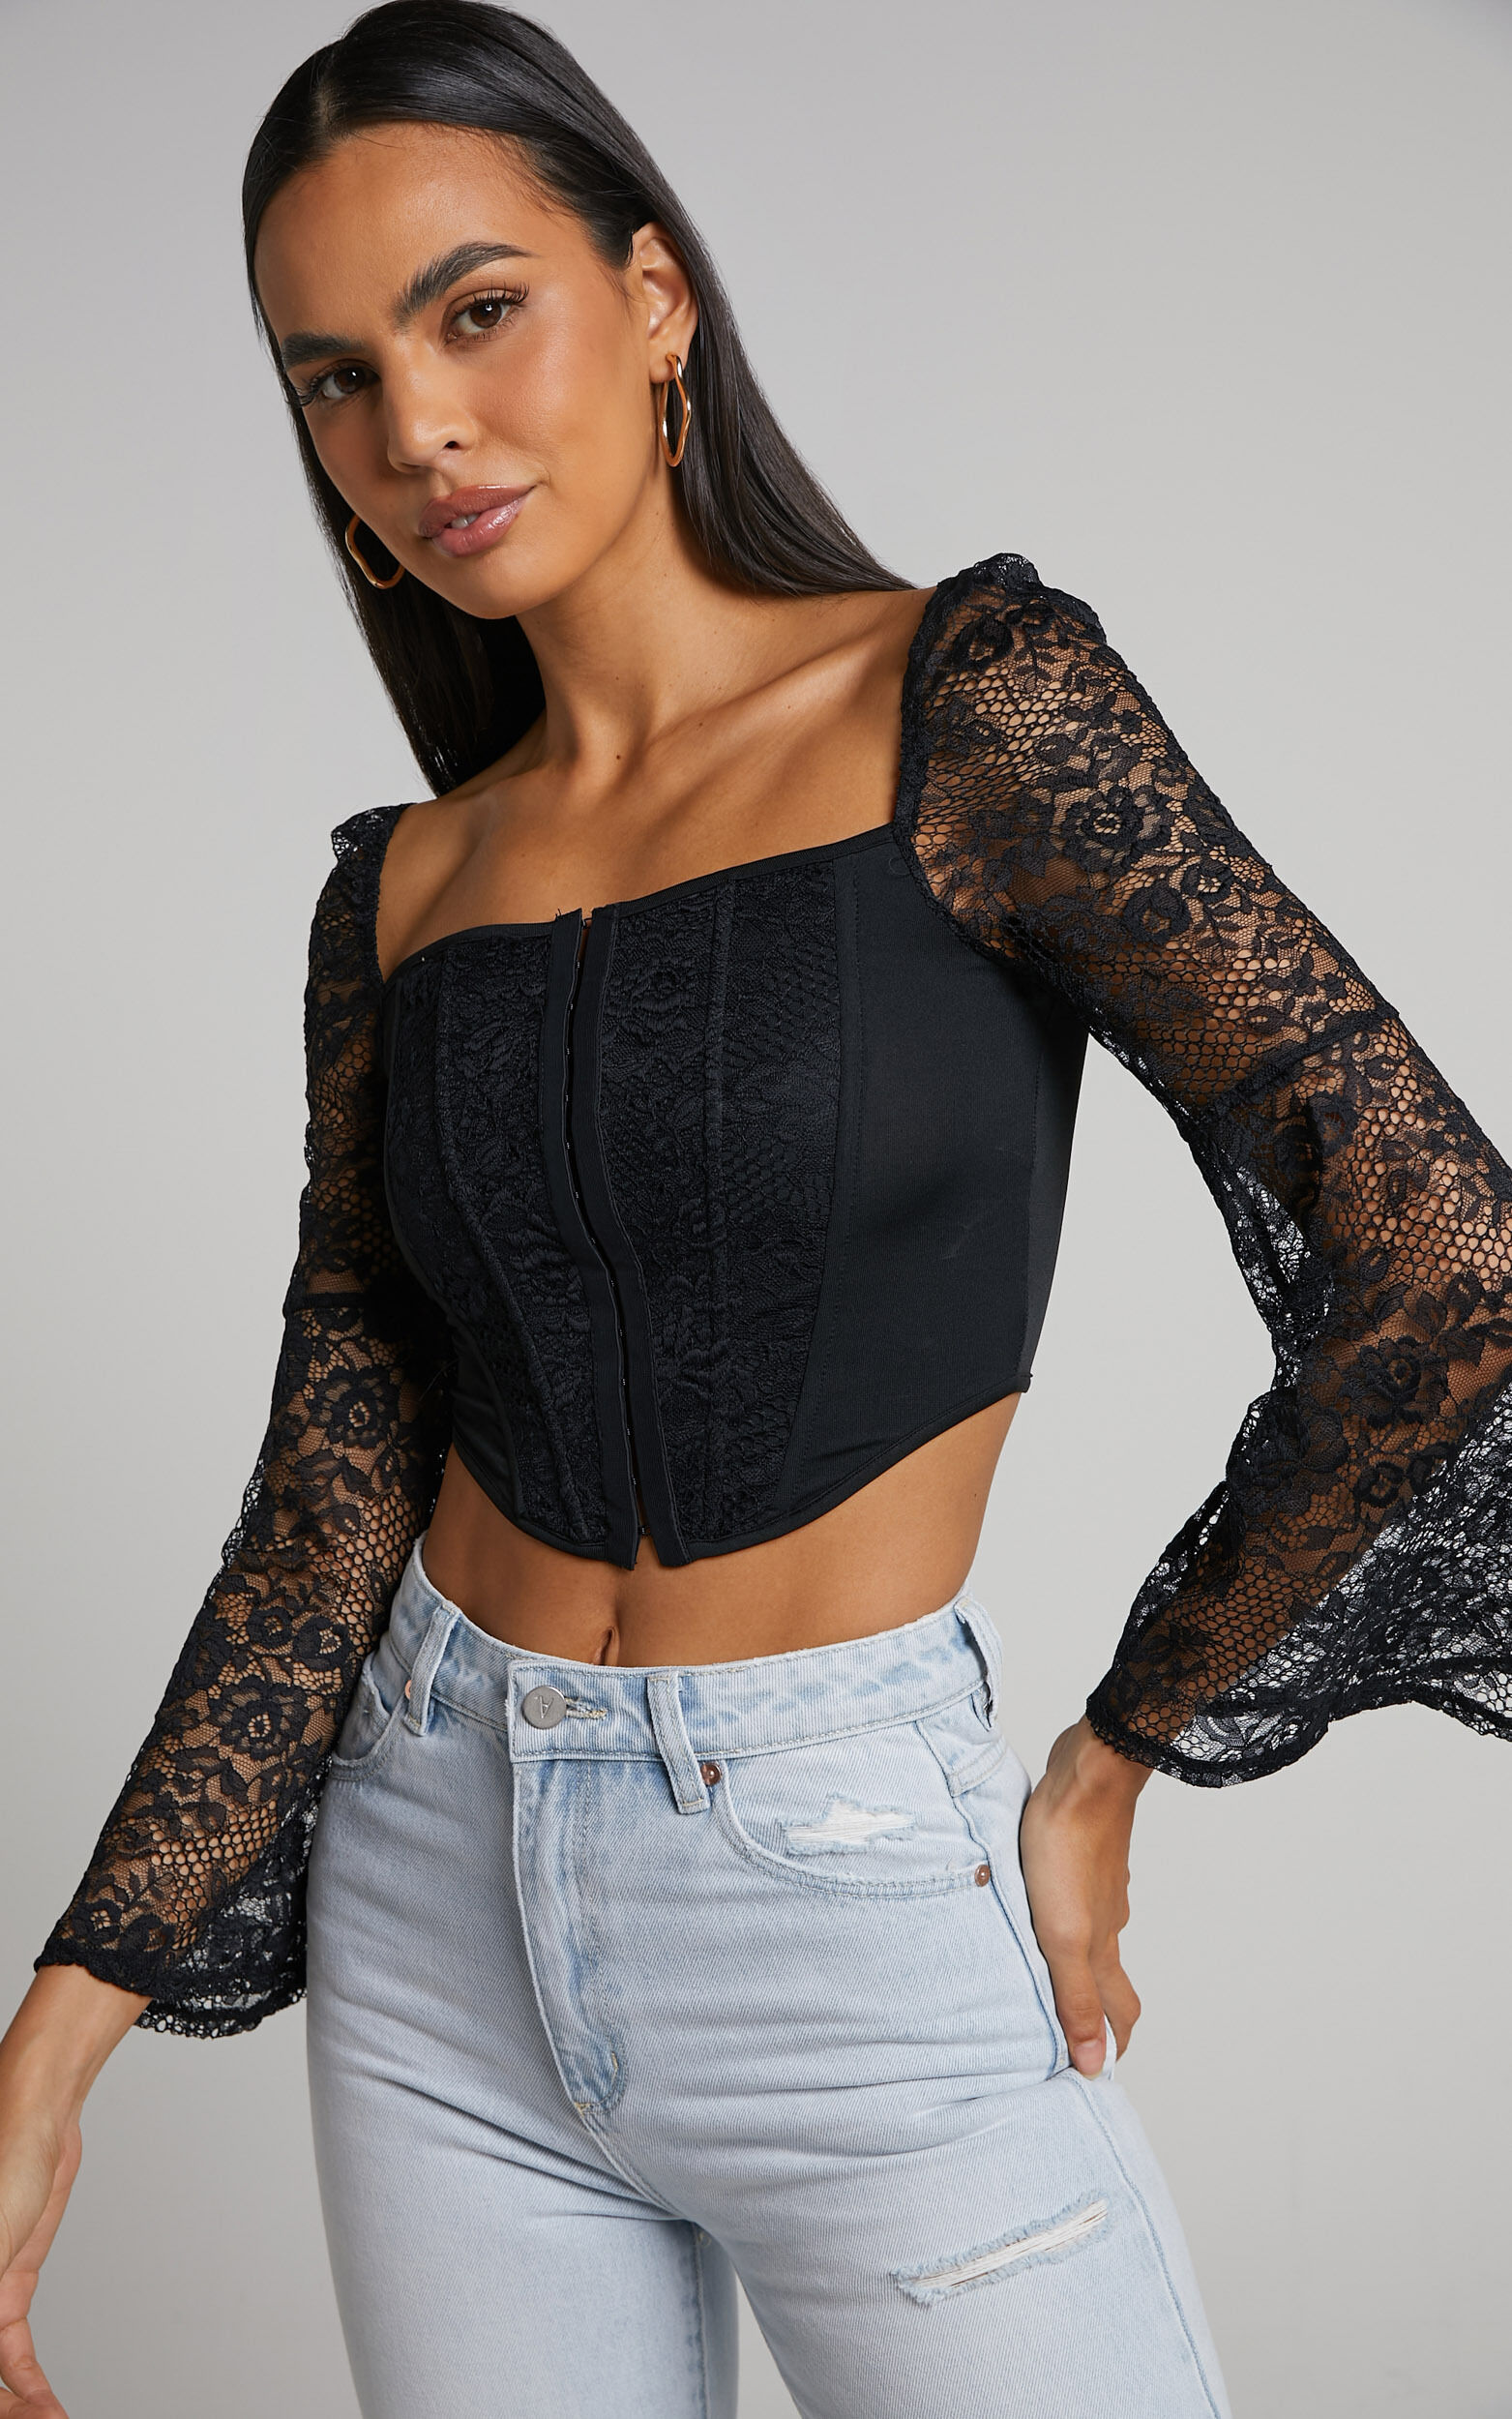 Sienna Top - Lace Bell Sleeve Corset Top in Black